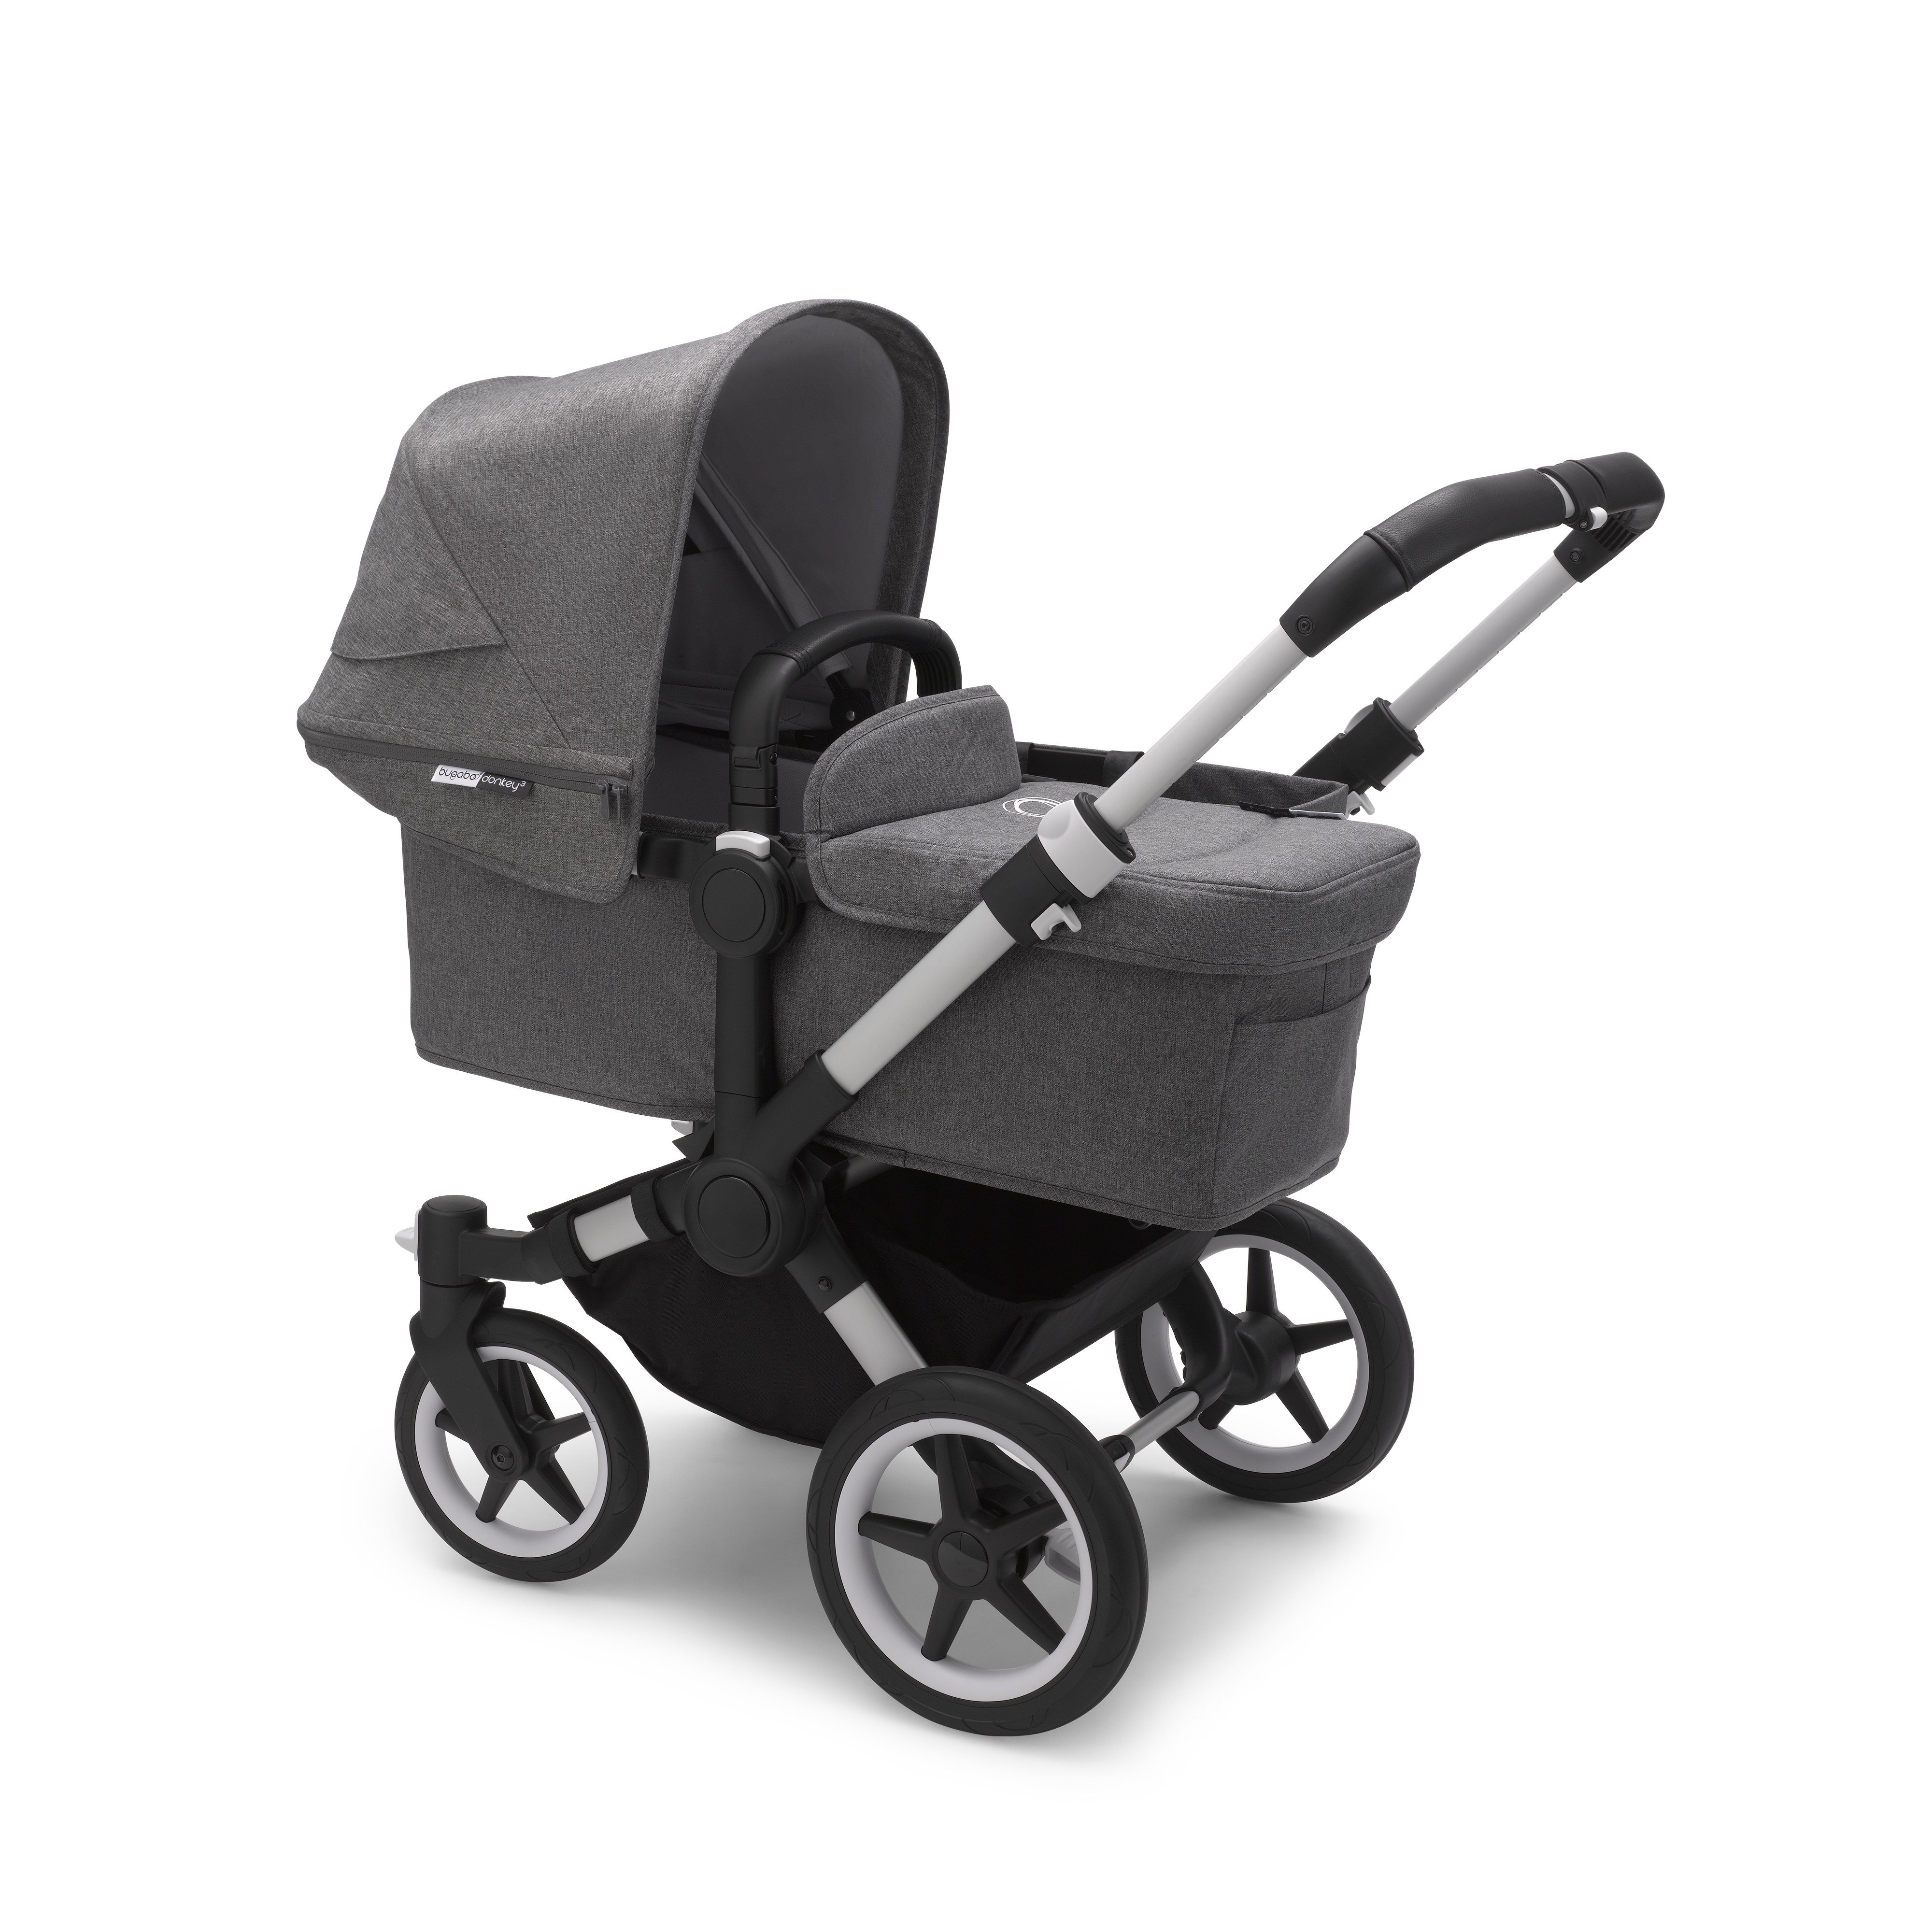 Classic Alu/Grey Melange Bugaboo Donkey2 Complete Mono Stroller the Most Spacious Foldable Stroller with the Option to Expand to a Double 